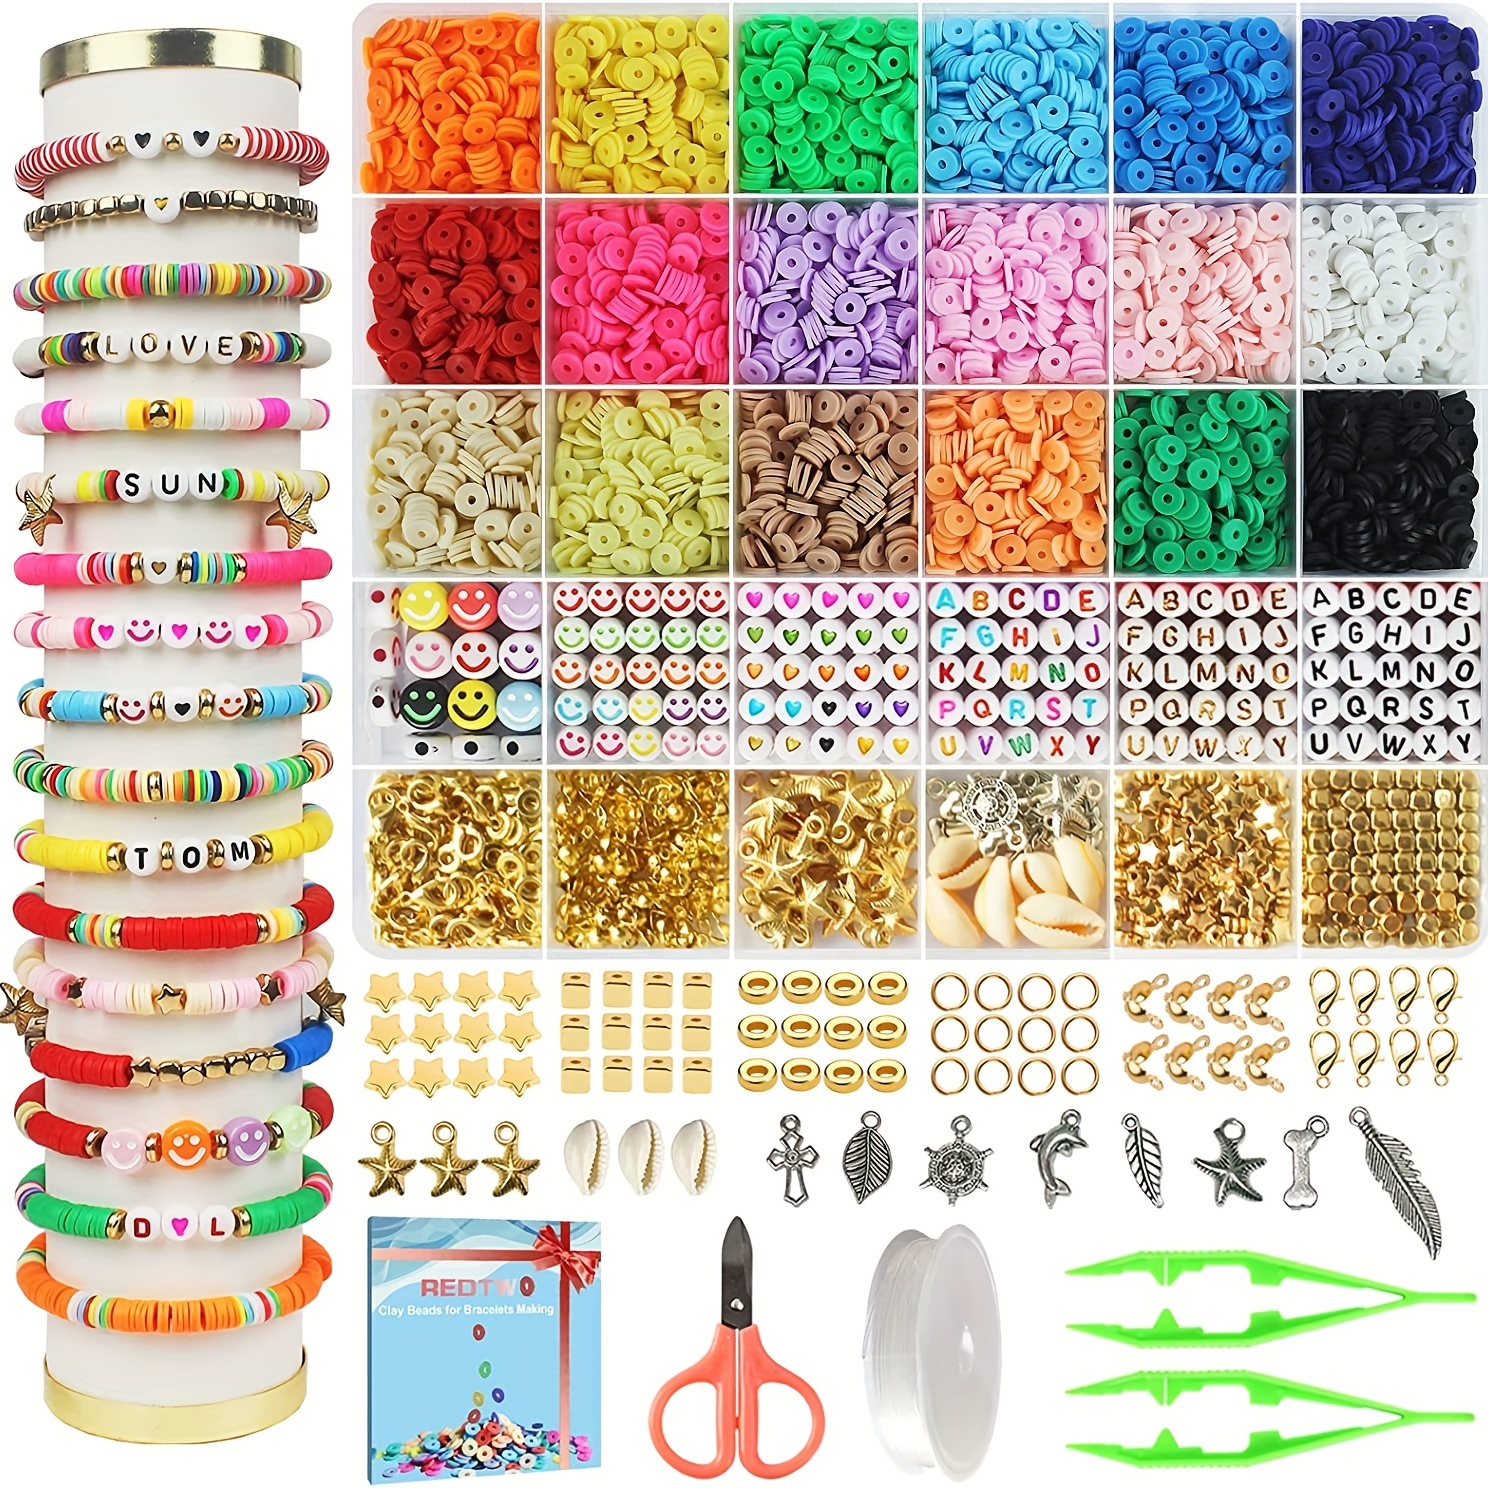 5100 Clay Beads Bracelet Making Kit, Preppy Spacer Flat Beads For Jewelry  Making, Polymer Heishi Beads With Charms And Elastic String For Girls Crafts